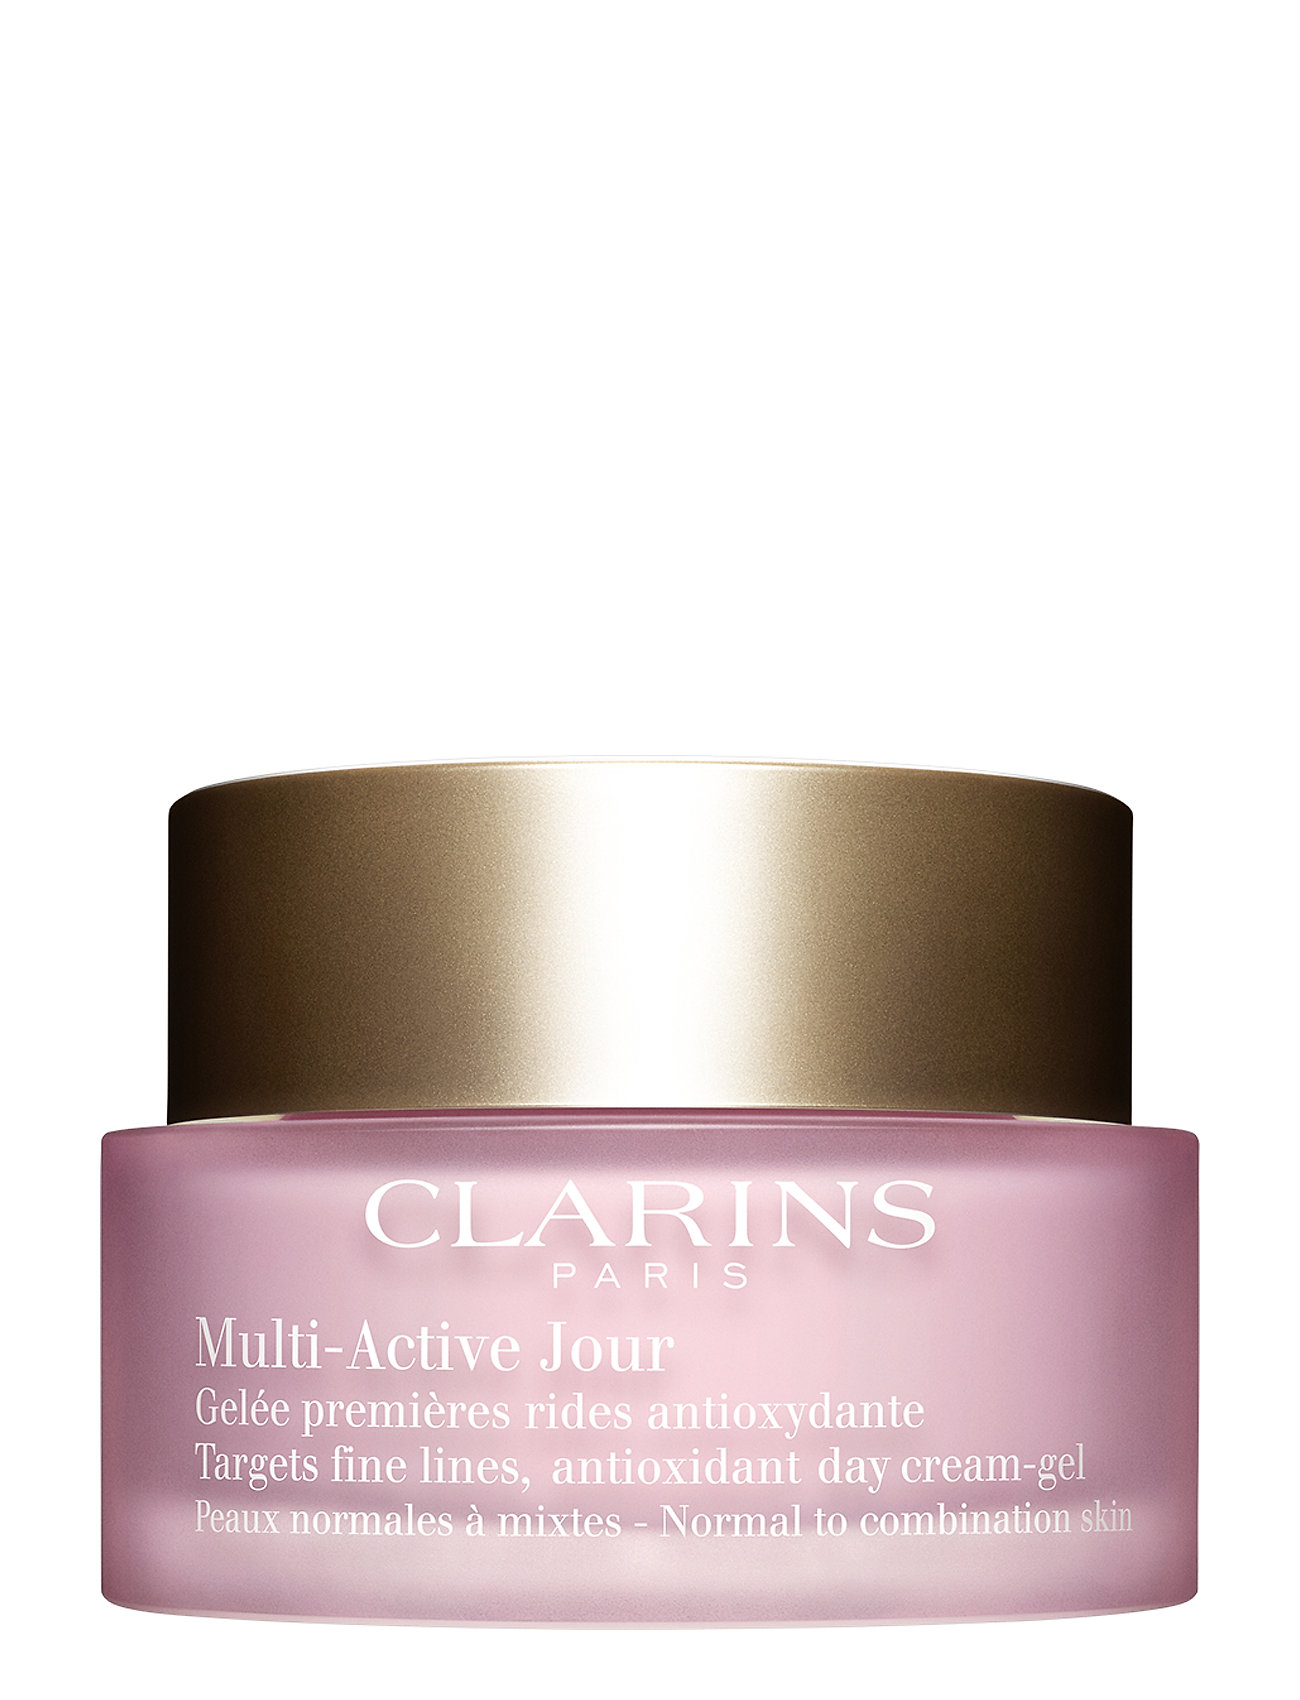 Multi-Active Day Cream-Gel Beauty WOMEN Skin Care Face Day Creams Nude Clarins